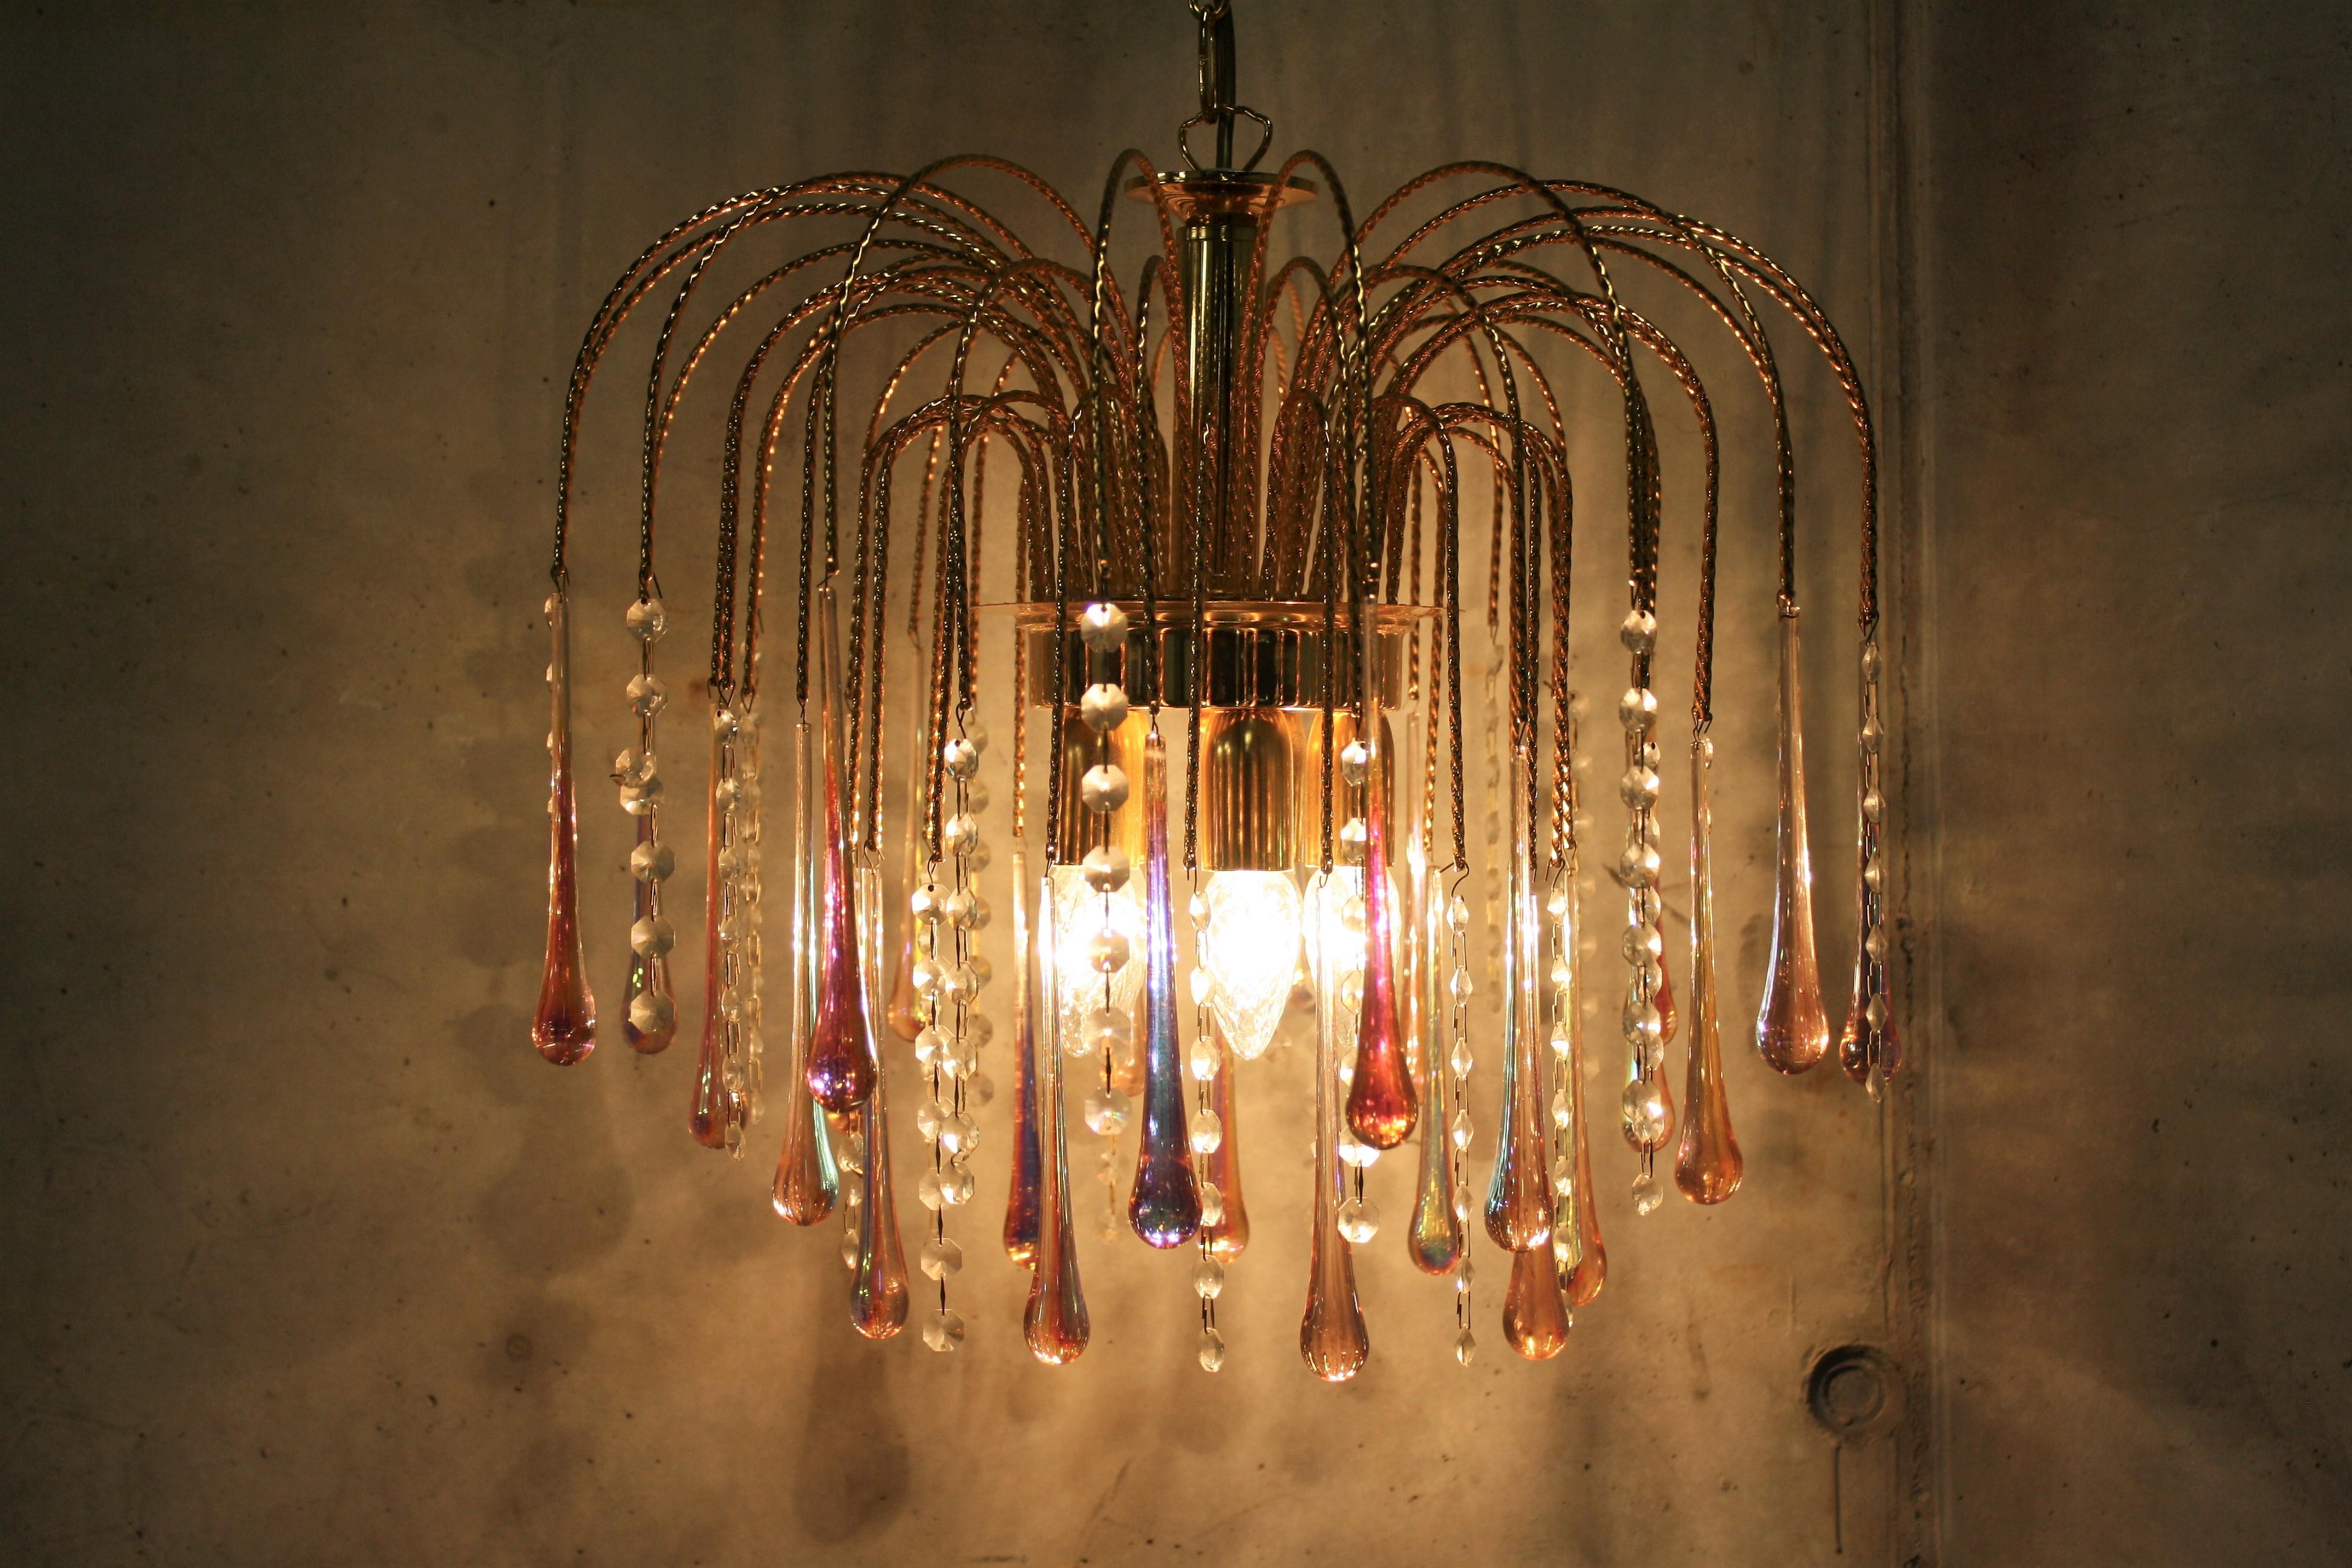 Elegant brass and crystal chandelier.

The lamp is decorated with handblown pink crystal Murano teardrop glasses.

This chandelier emits a warm light.

The lamp is fitted with five E14 light sockets.

It comes with its original chain and